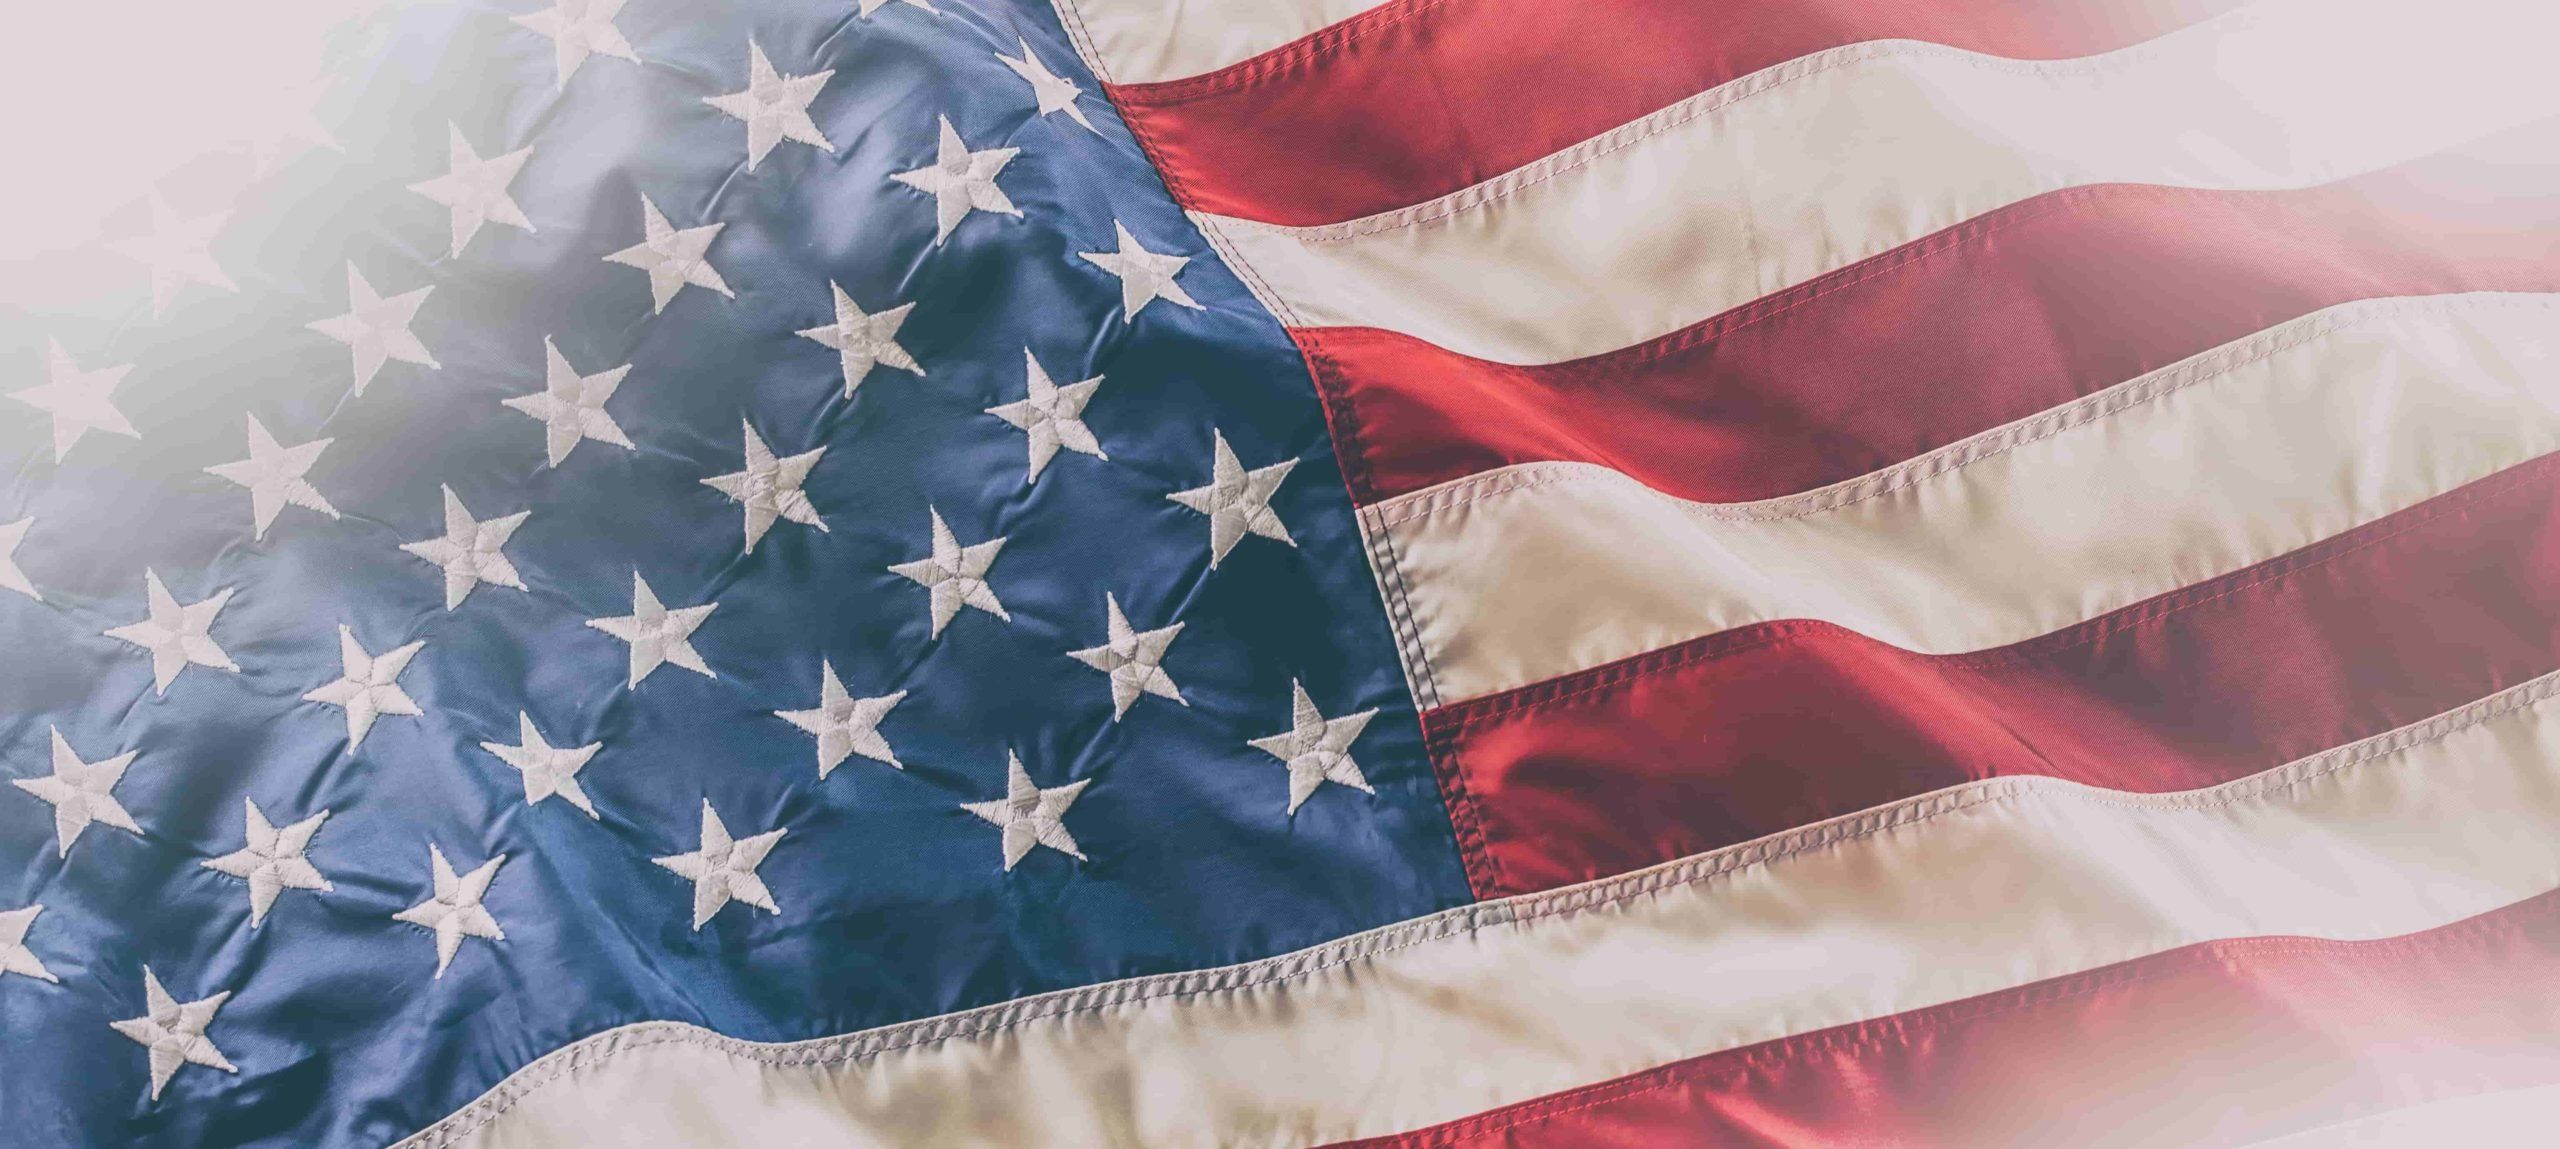 A Brief History Of The American Flag